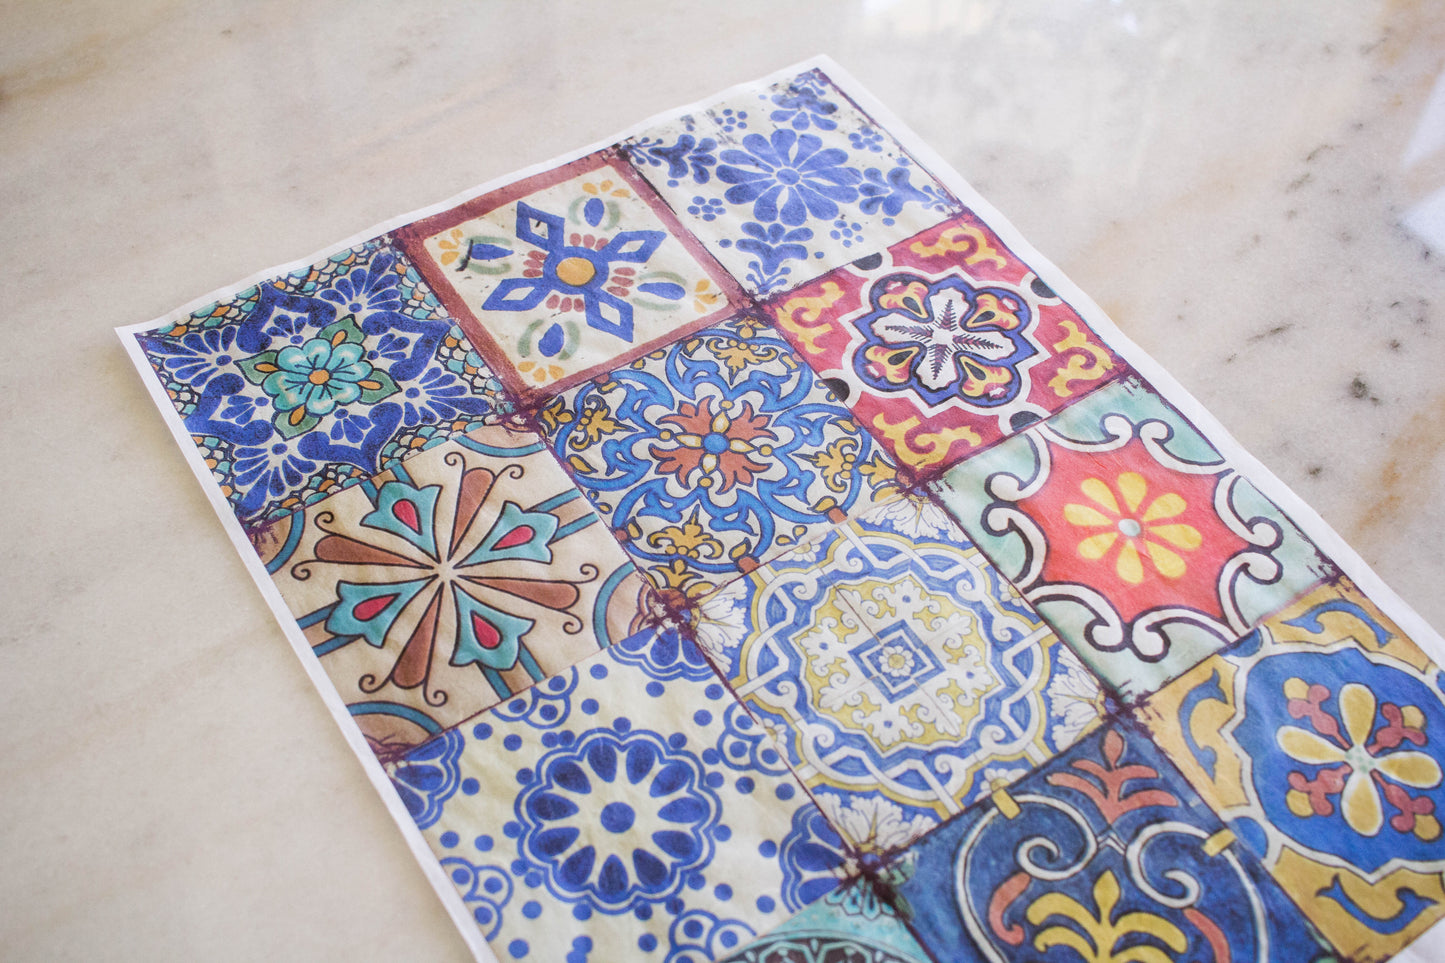 Belles and Whistles Rice Paper - Colorful Tiles